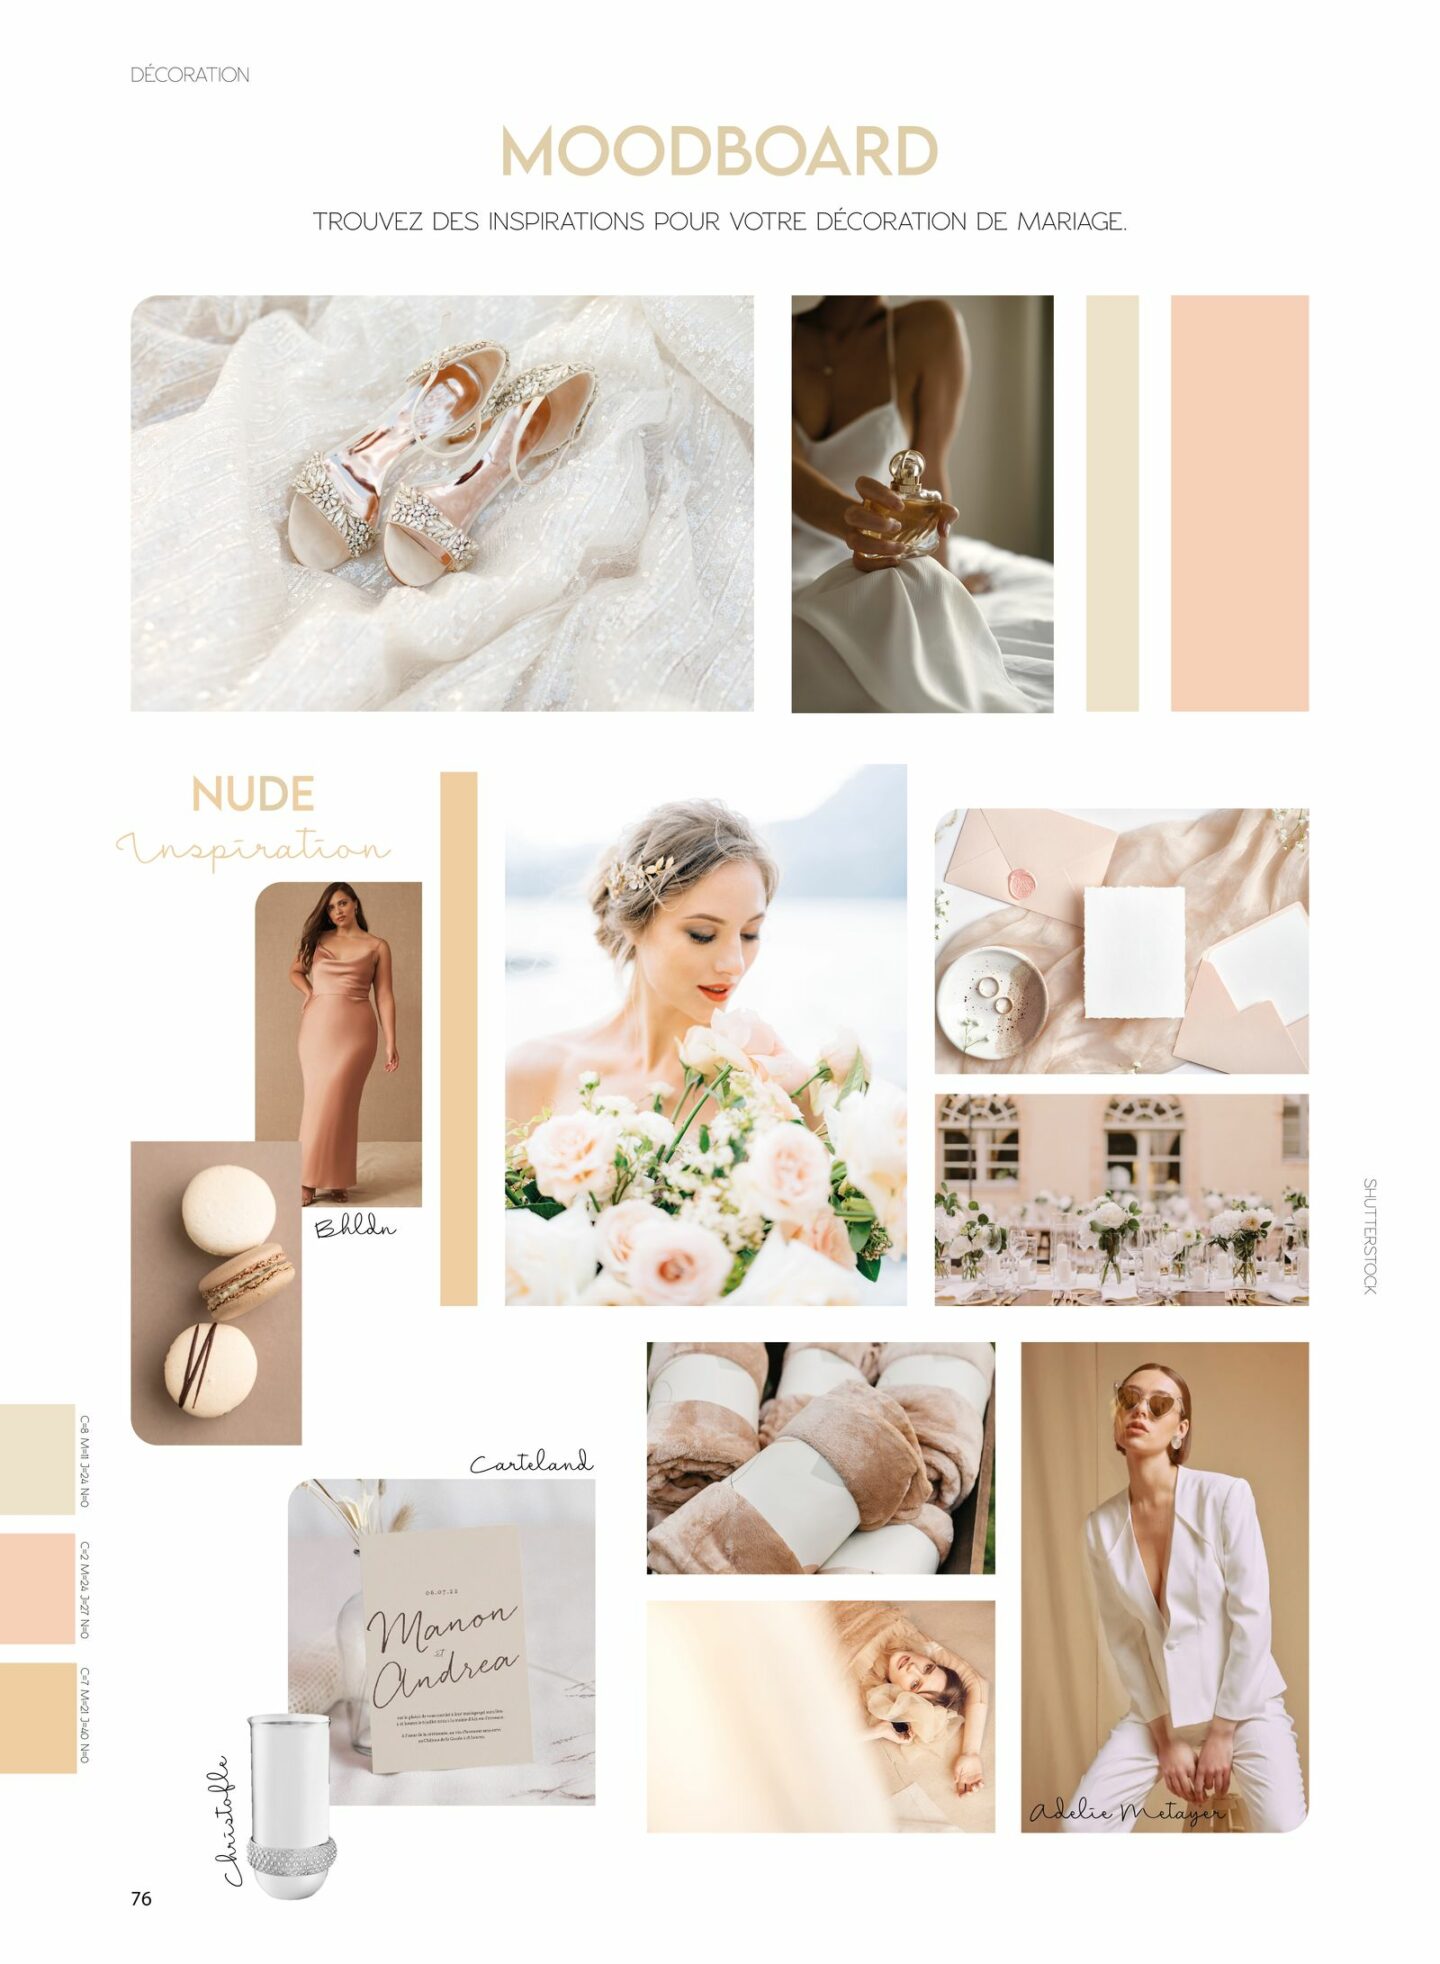 Albe Editions - Blog mariage - wedding - Nude - Décoration - inspiration - conseils